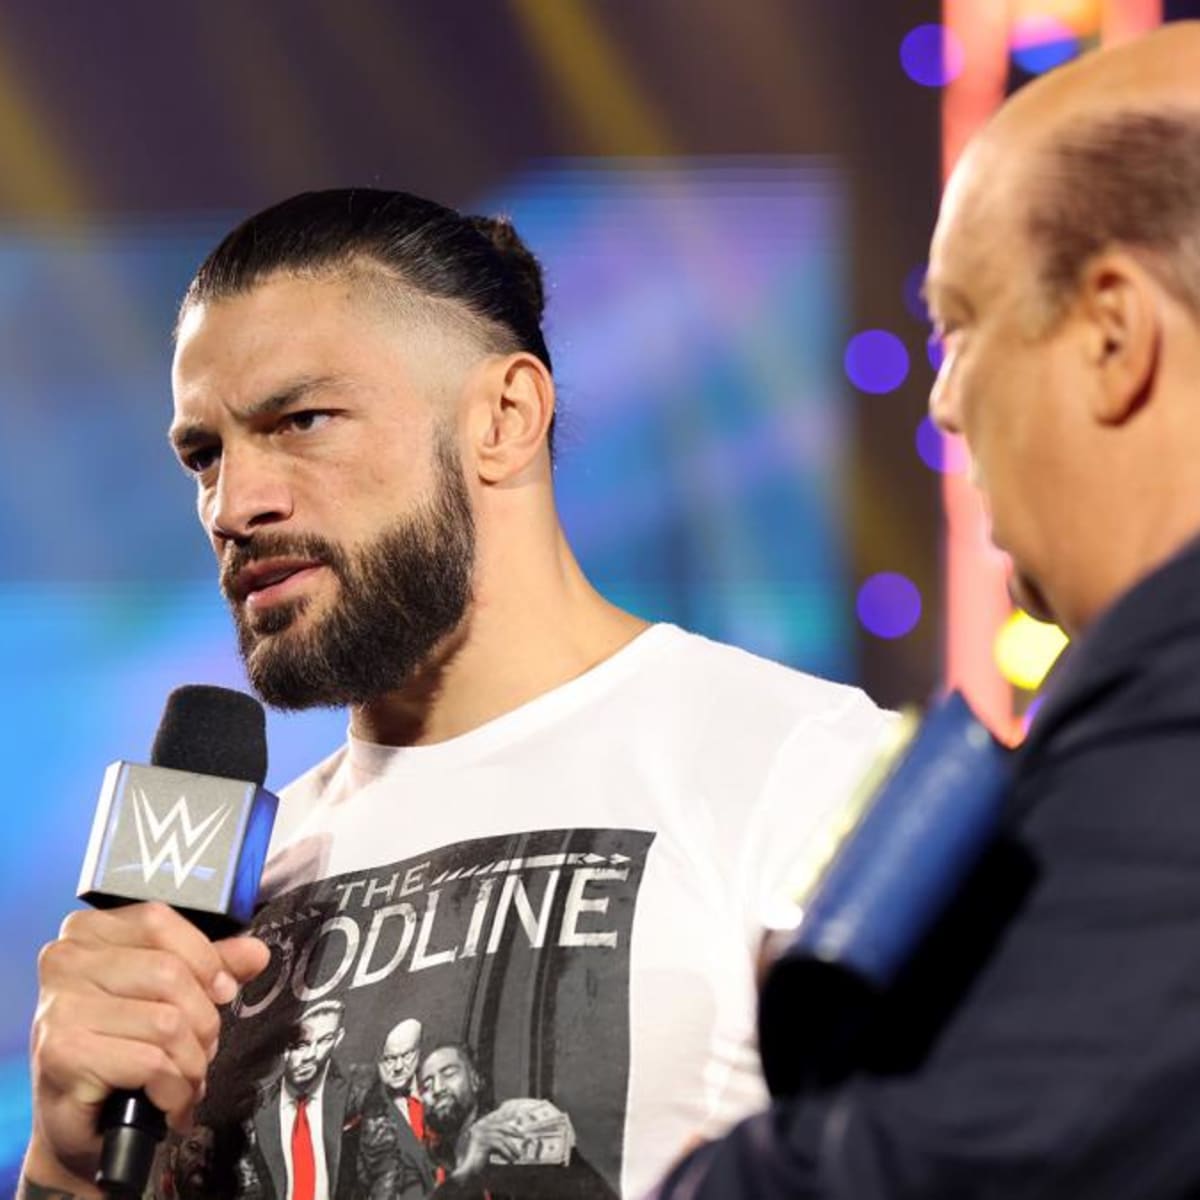 Roman Reigns to reveal whats next on WWE SmackDown  WONF4W  WWE news  Pro Wrestling News WWE Results AEW News AEW results